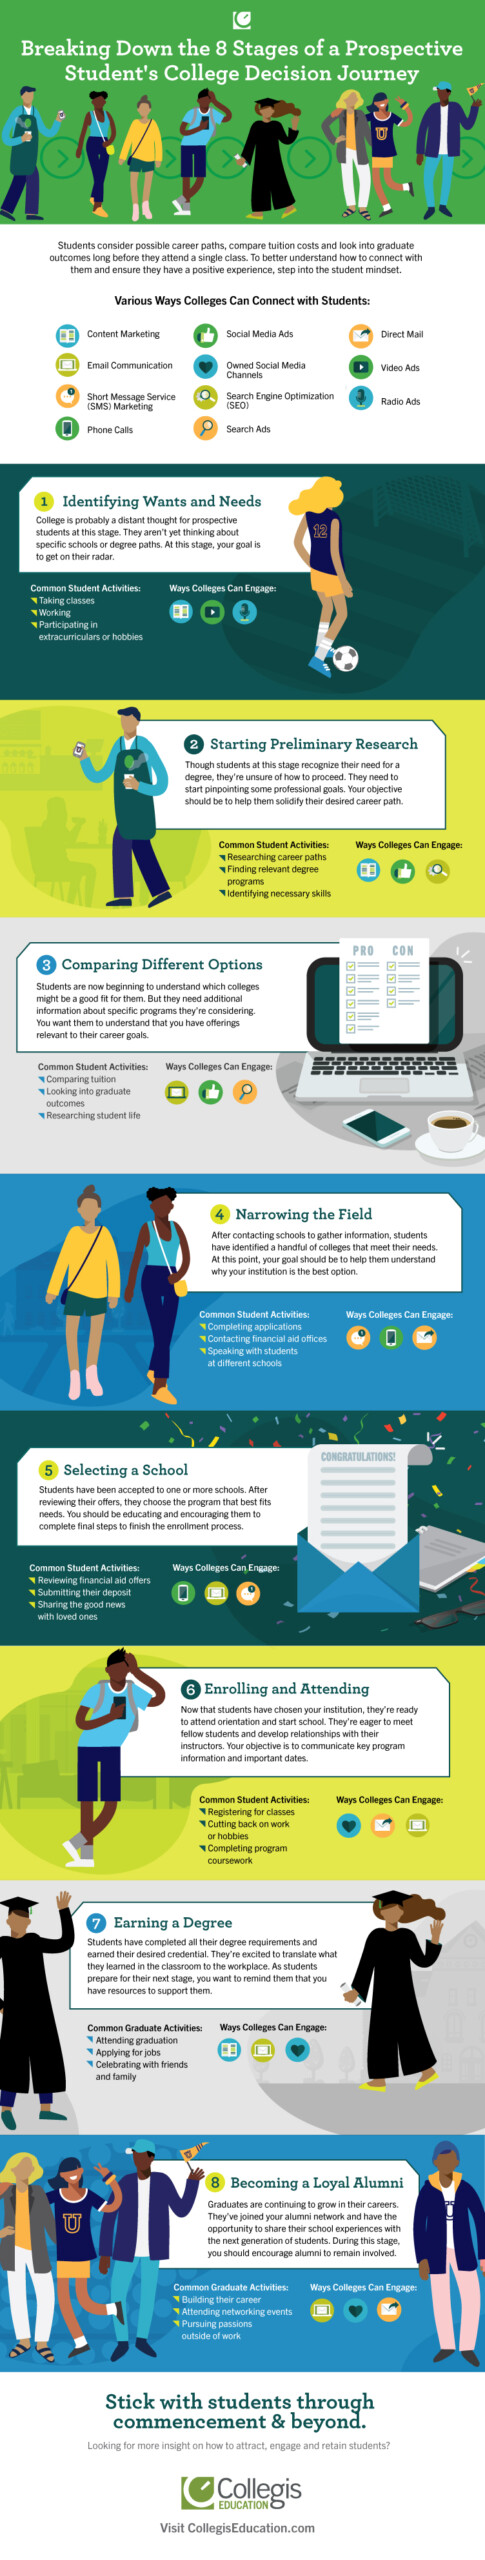 8 Stages of the College Decision Process Infographic